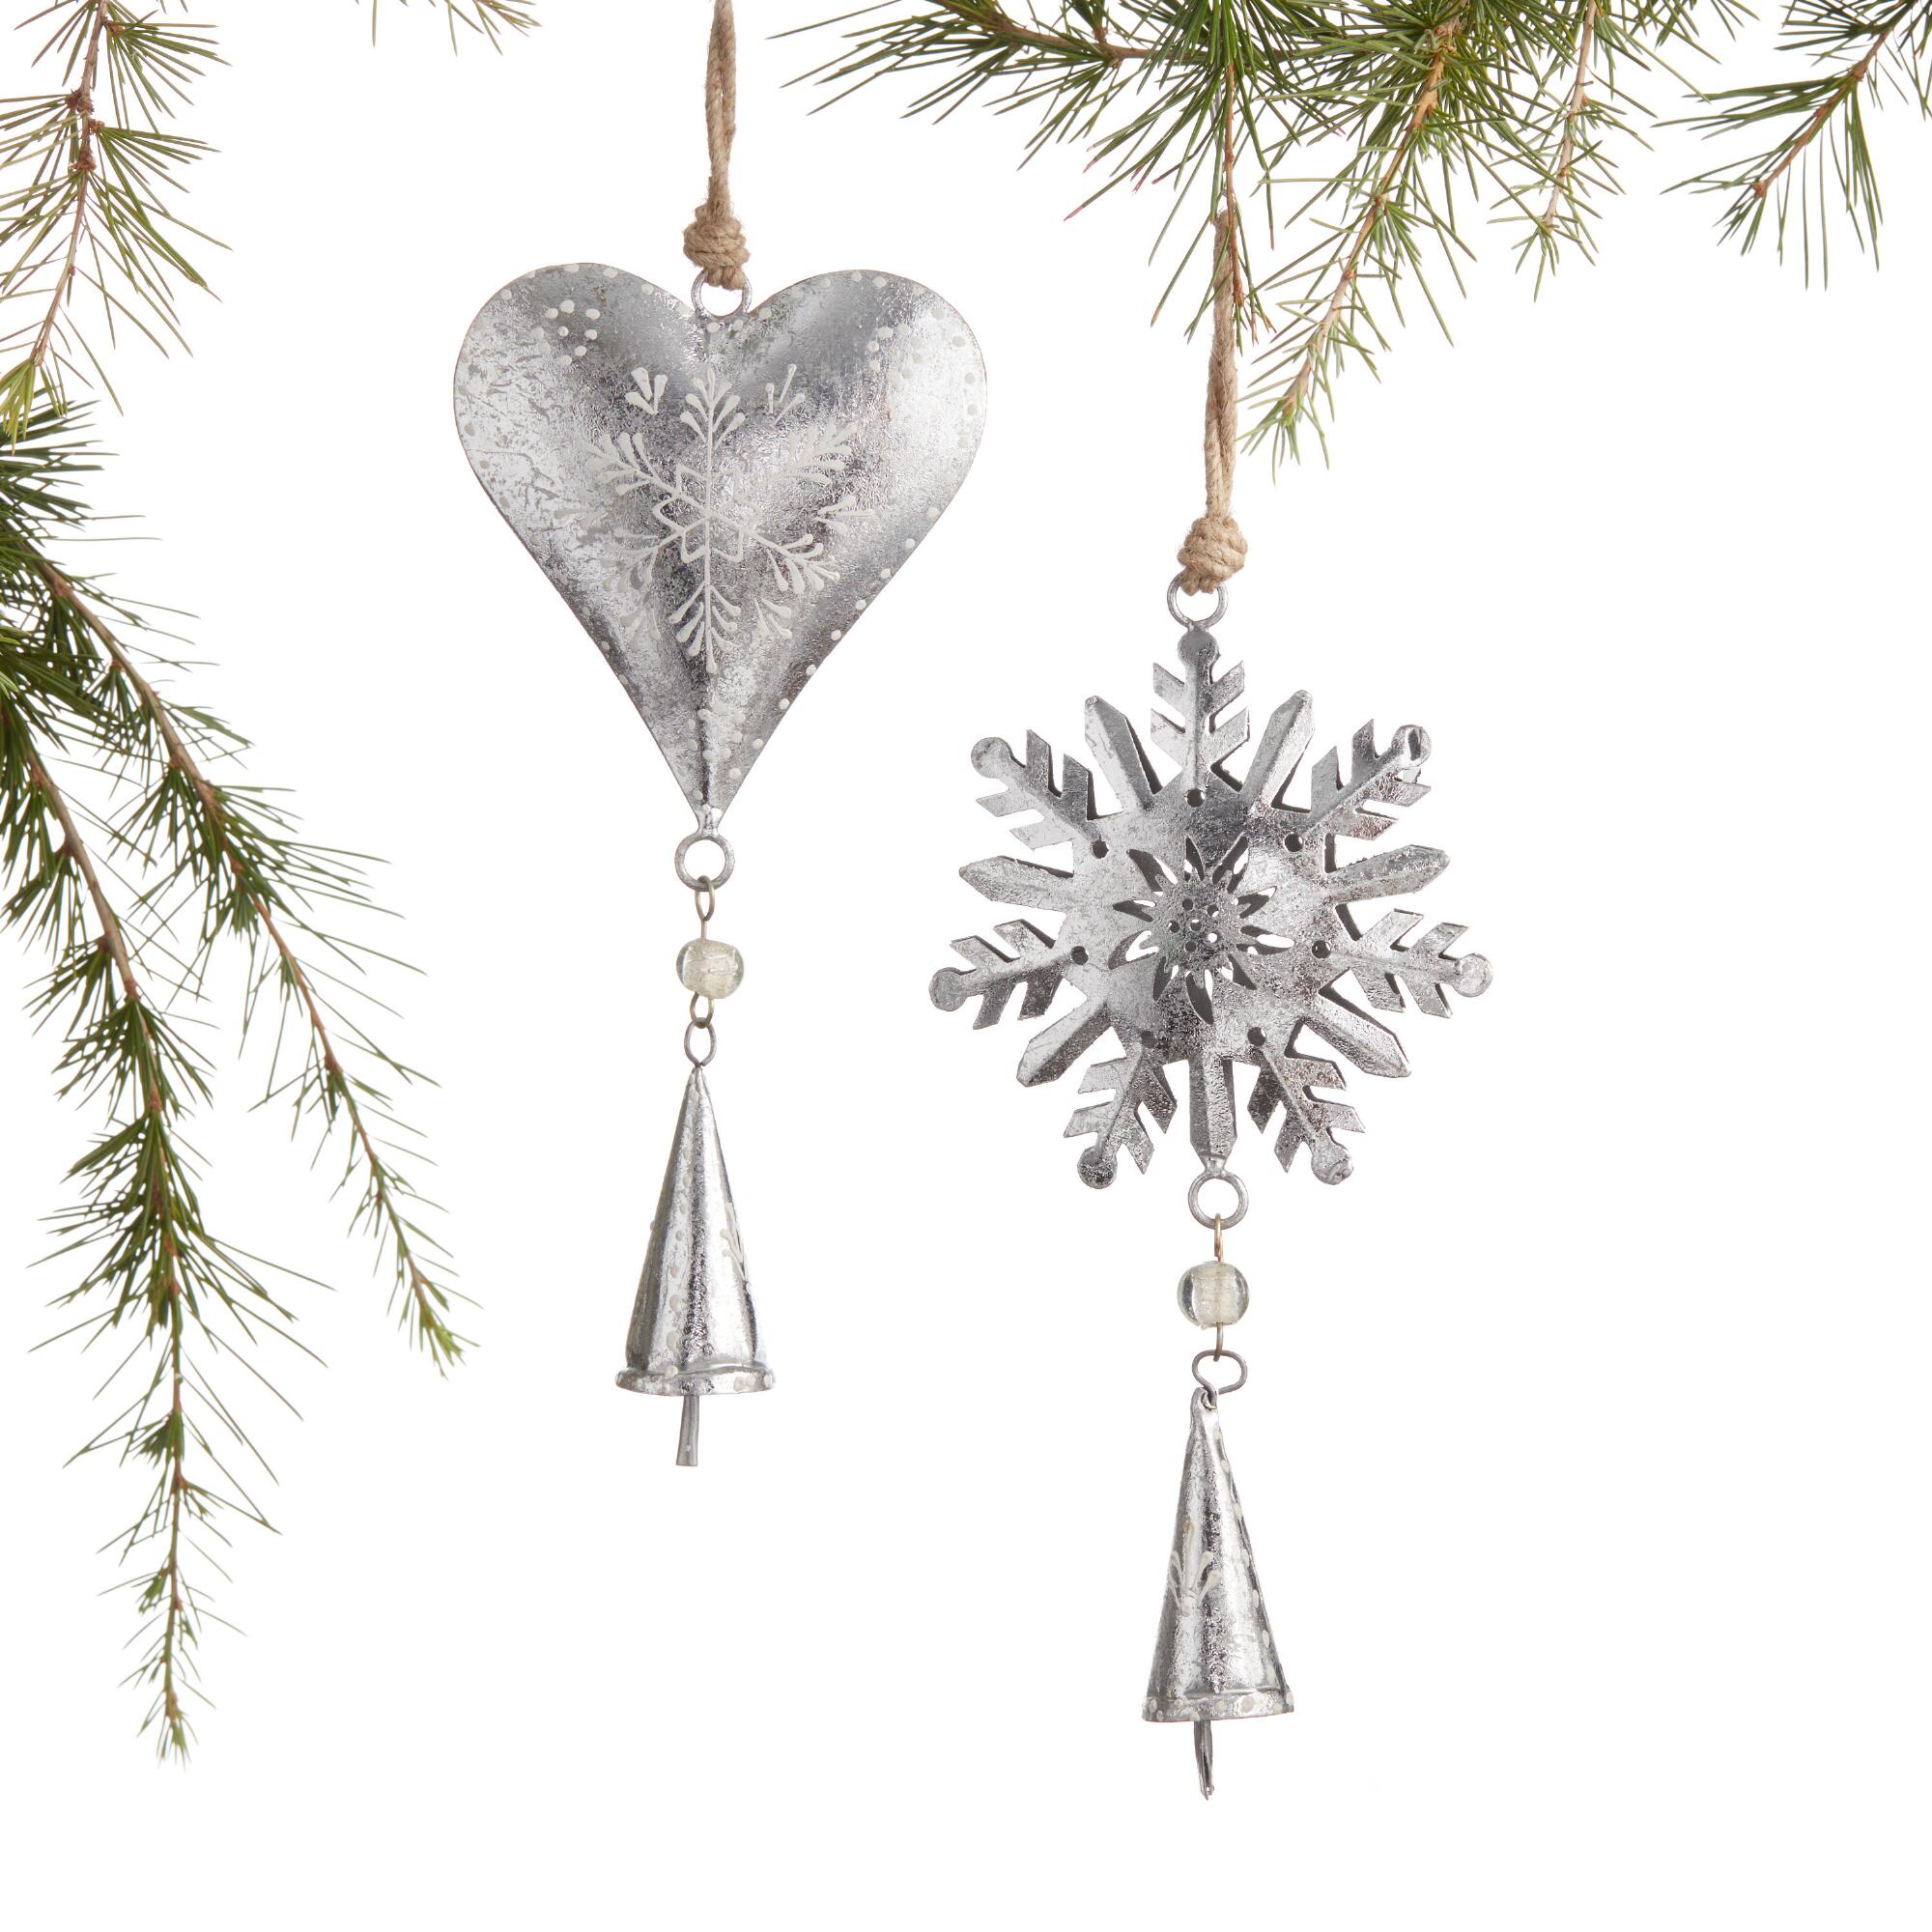 Metal Snowflake and Heart with Bell Ornaments Set of 2: Multi by World Market